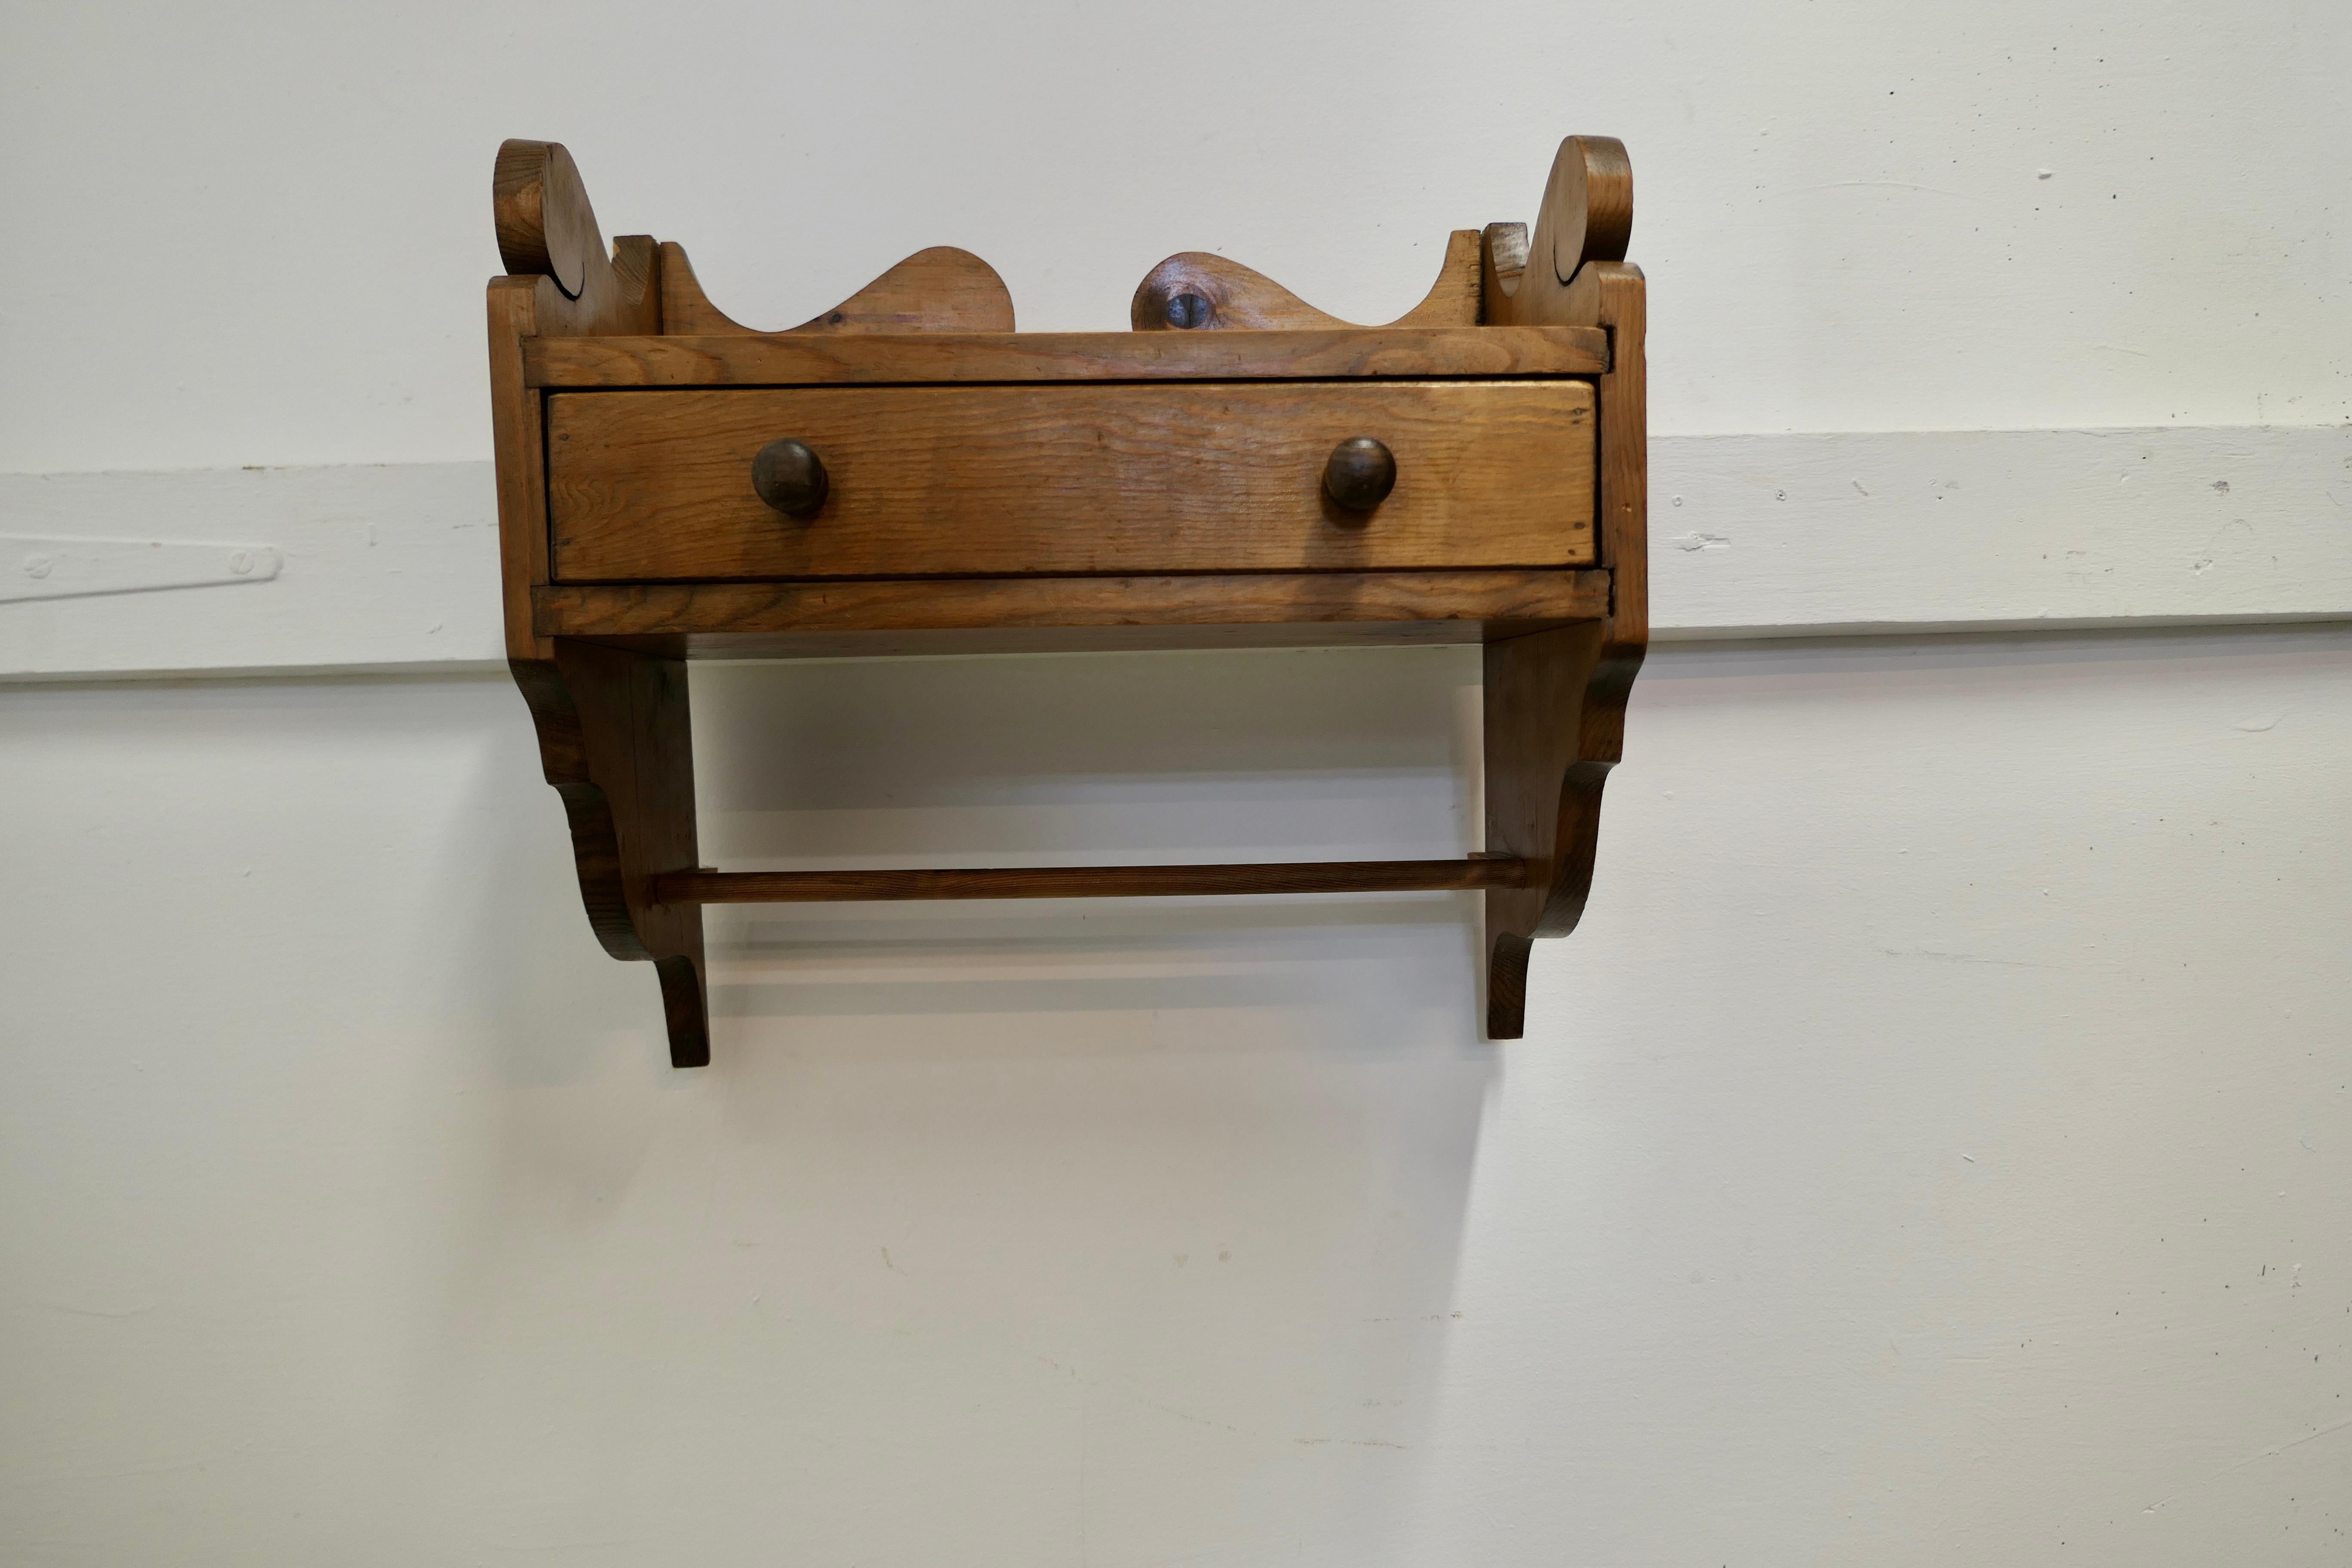 Vintage Rustic Pine Folk Art Wall Shelf with drawer.

This charming little wall hanging shelf has a small drawer with a towel rail beneath
The shelf is 15” high, 17” wide and 8” deep
TJK274.